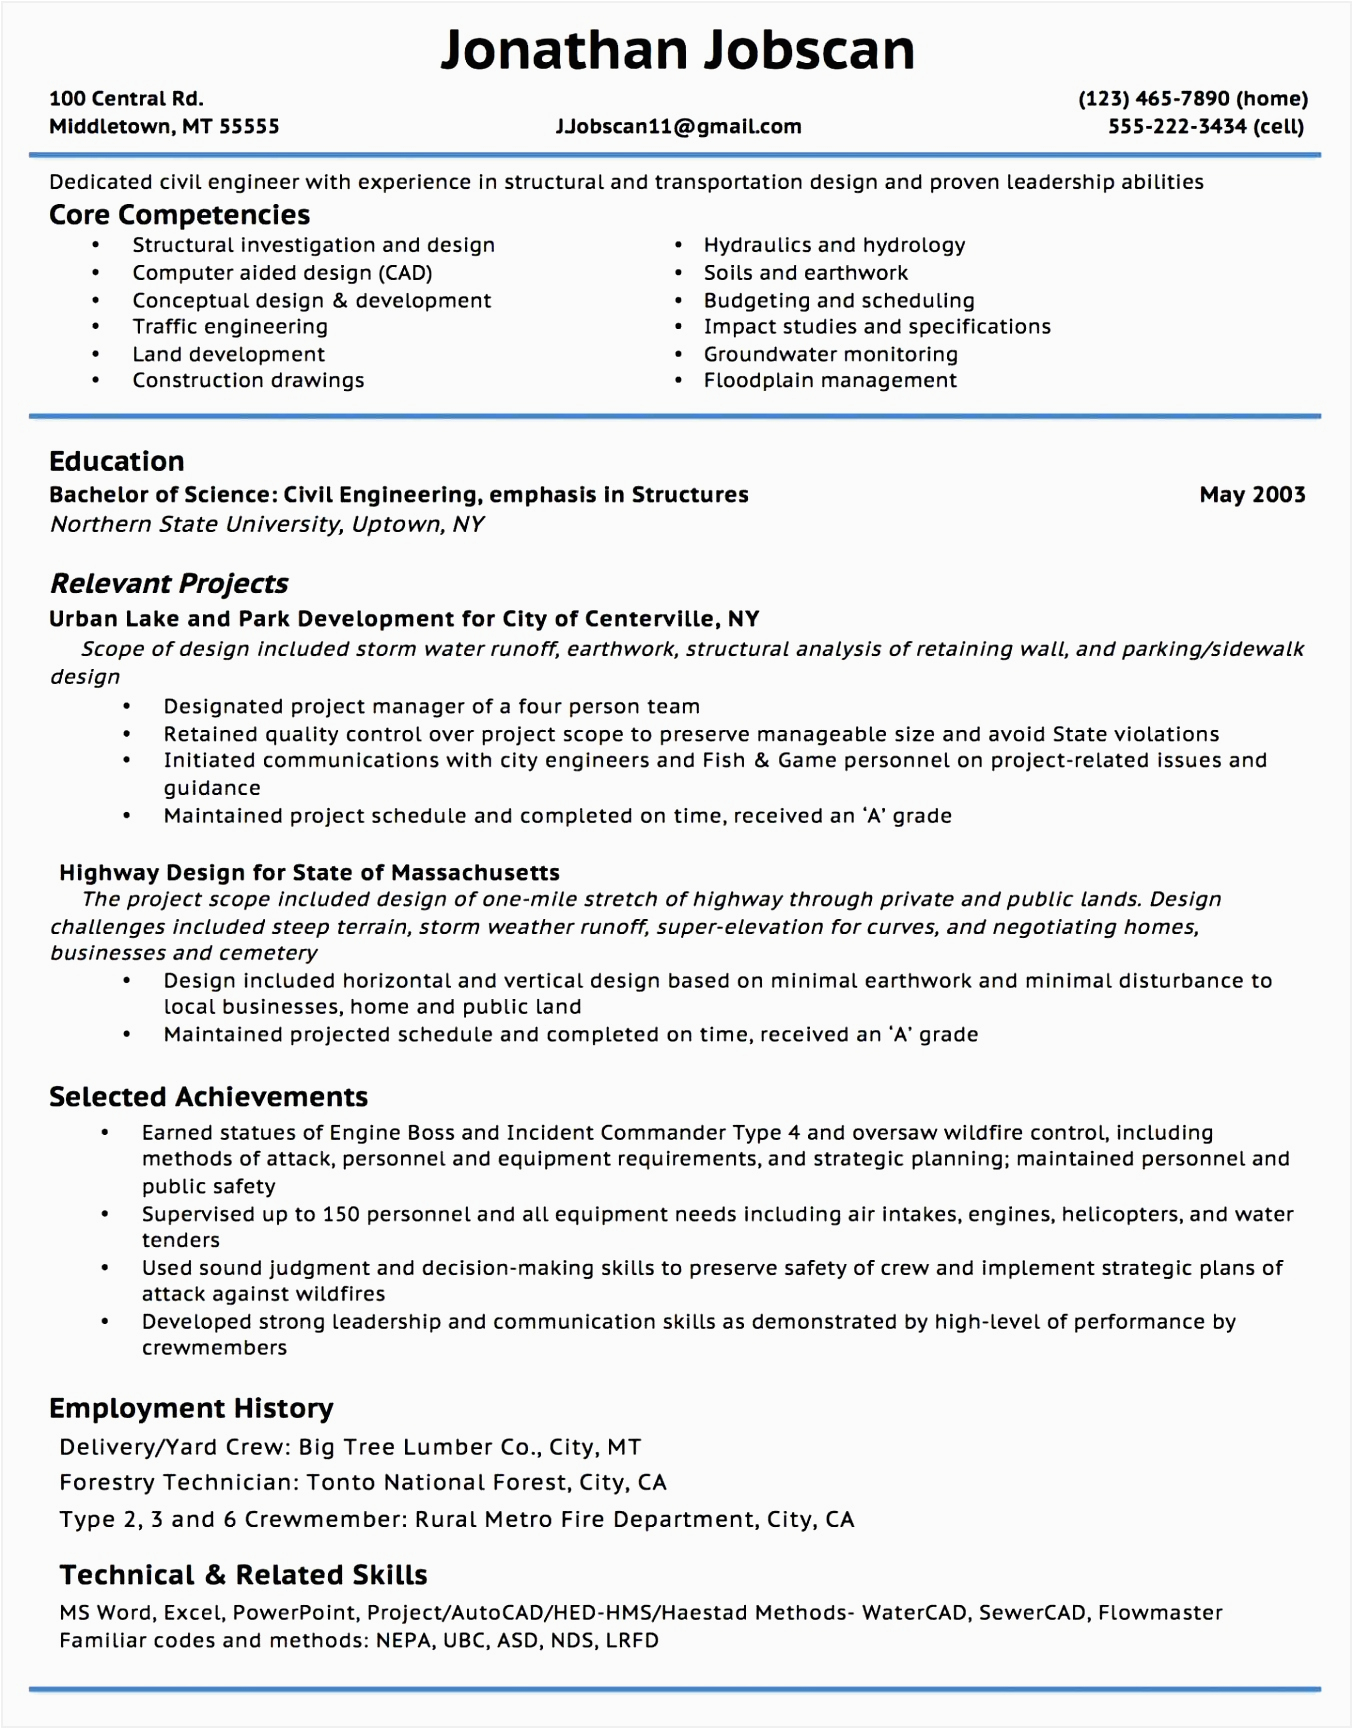 Oil and Gas Resume Samples Pdf 6 Cemetery Manager Sample Resume Shtkky